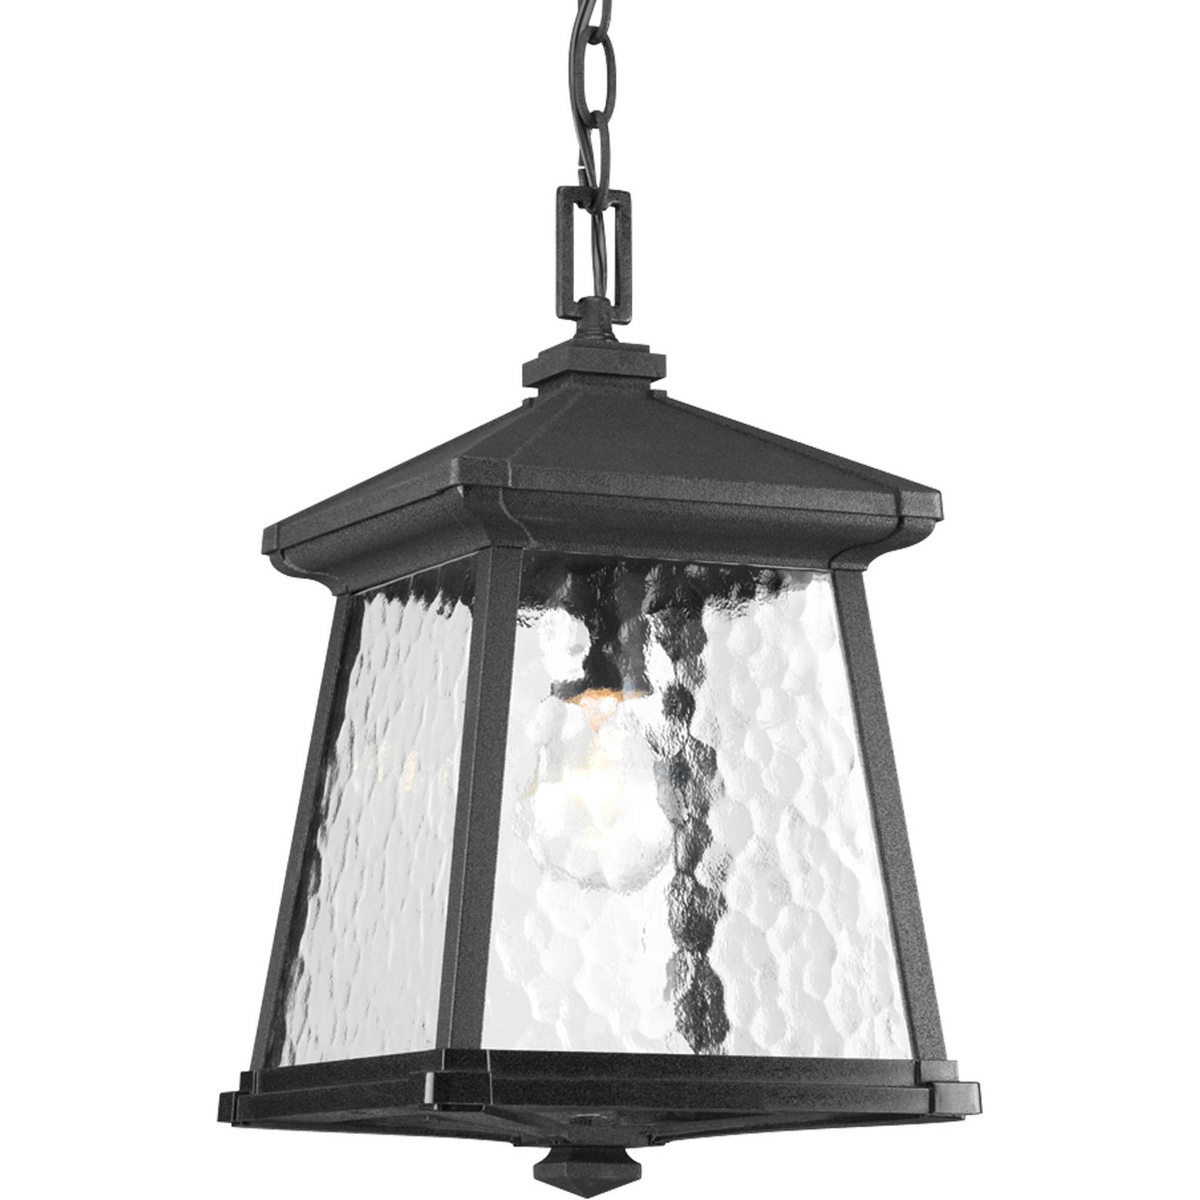 P5559-31 785247170289 Classic arts and crafts inspired profile. Cast aluminum construction with clear water glass and decorative bottom detail. Textured black powder coated finish. One-light hanging lantern.